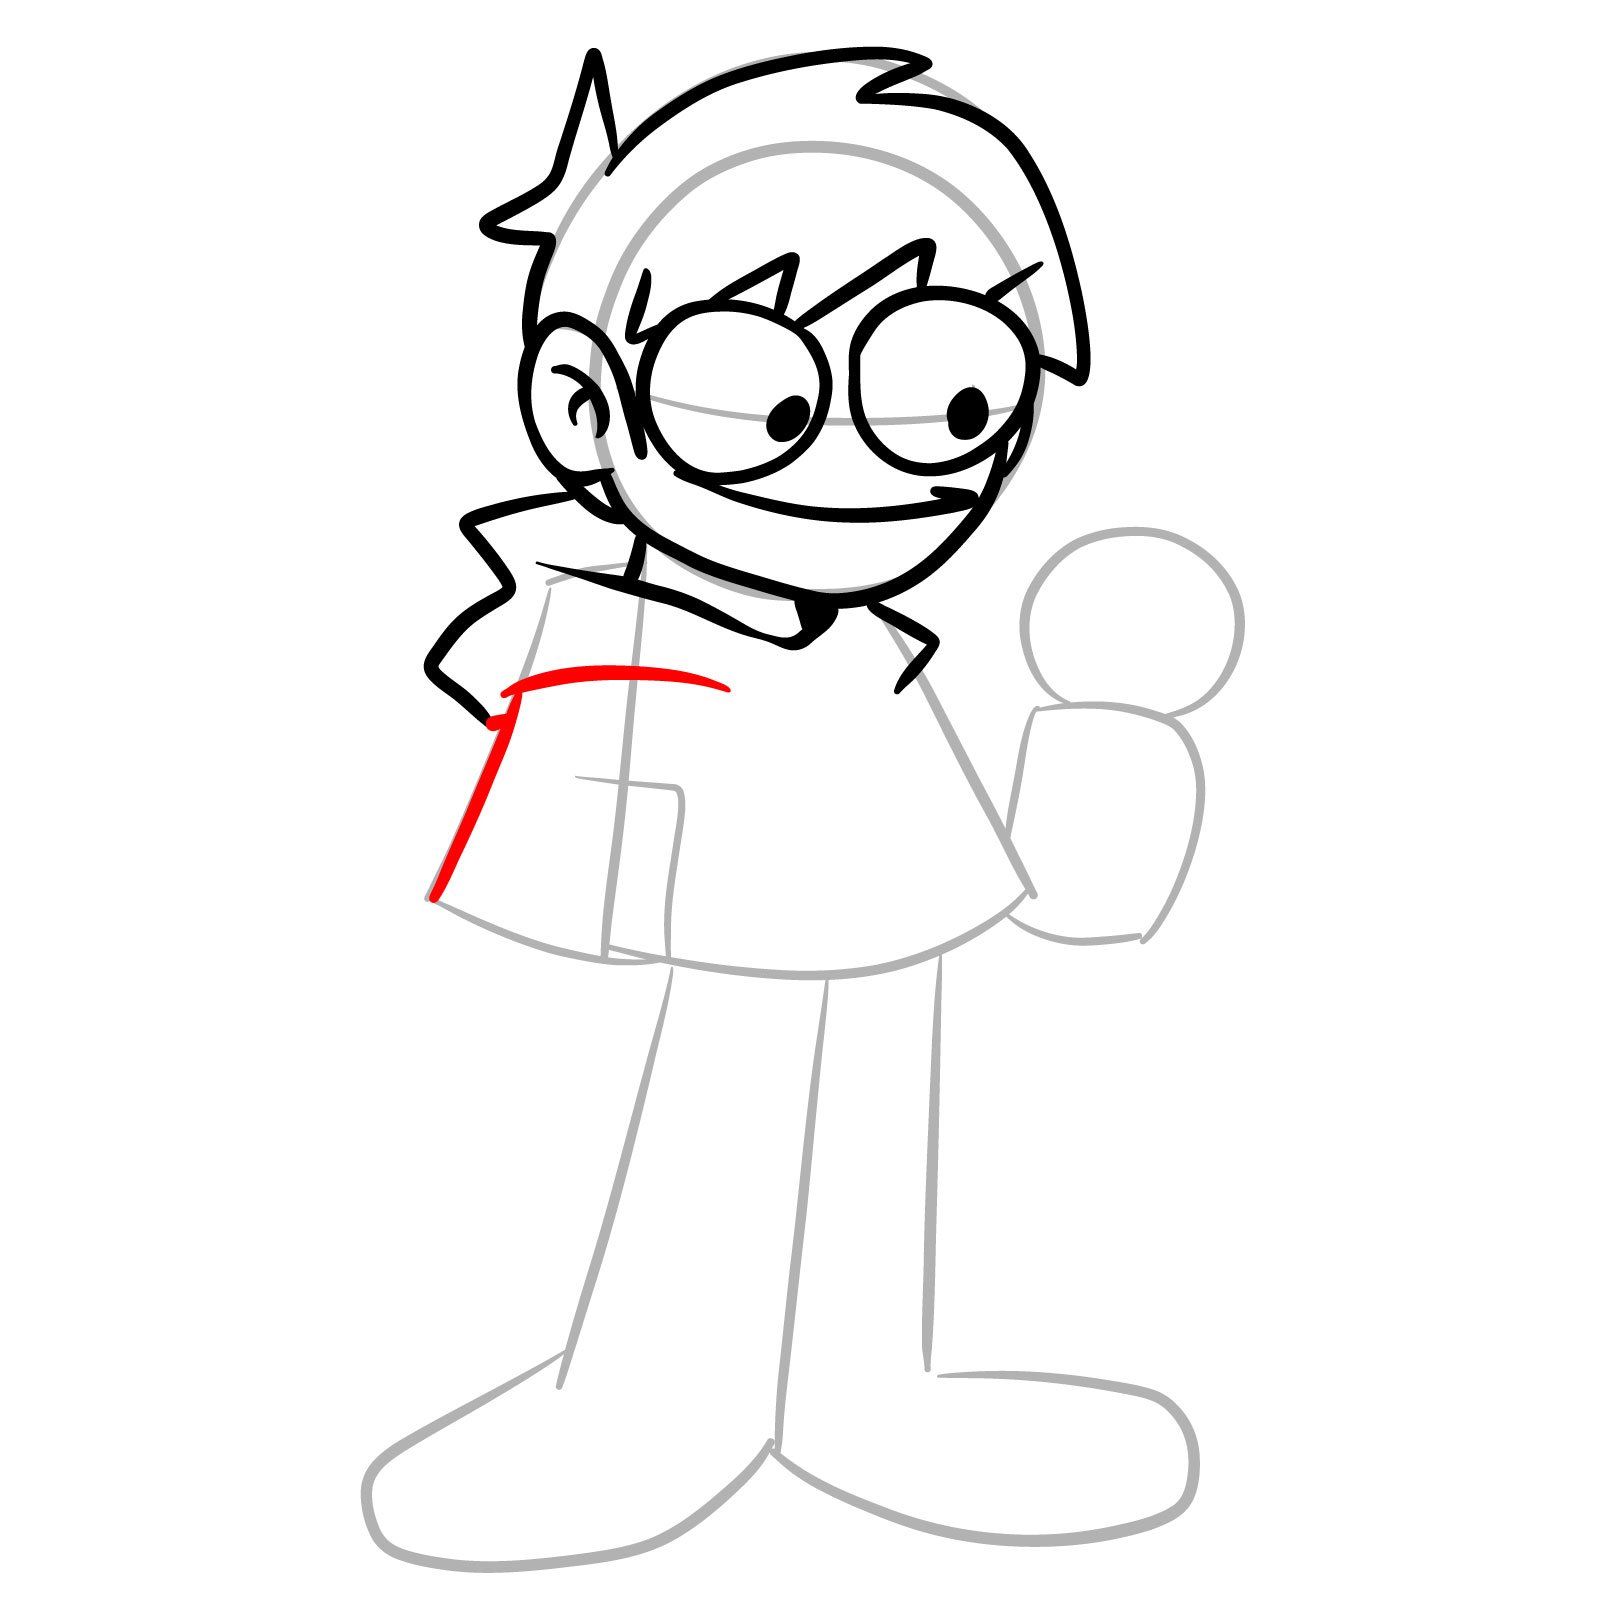 How to draw Edd from Online Vs - step 13